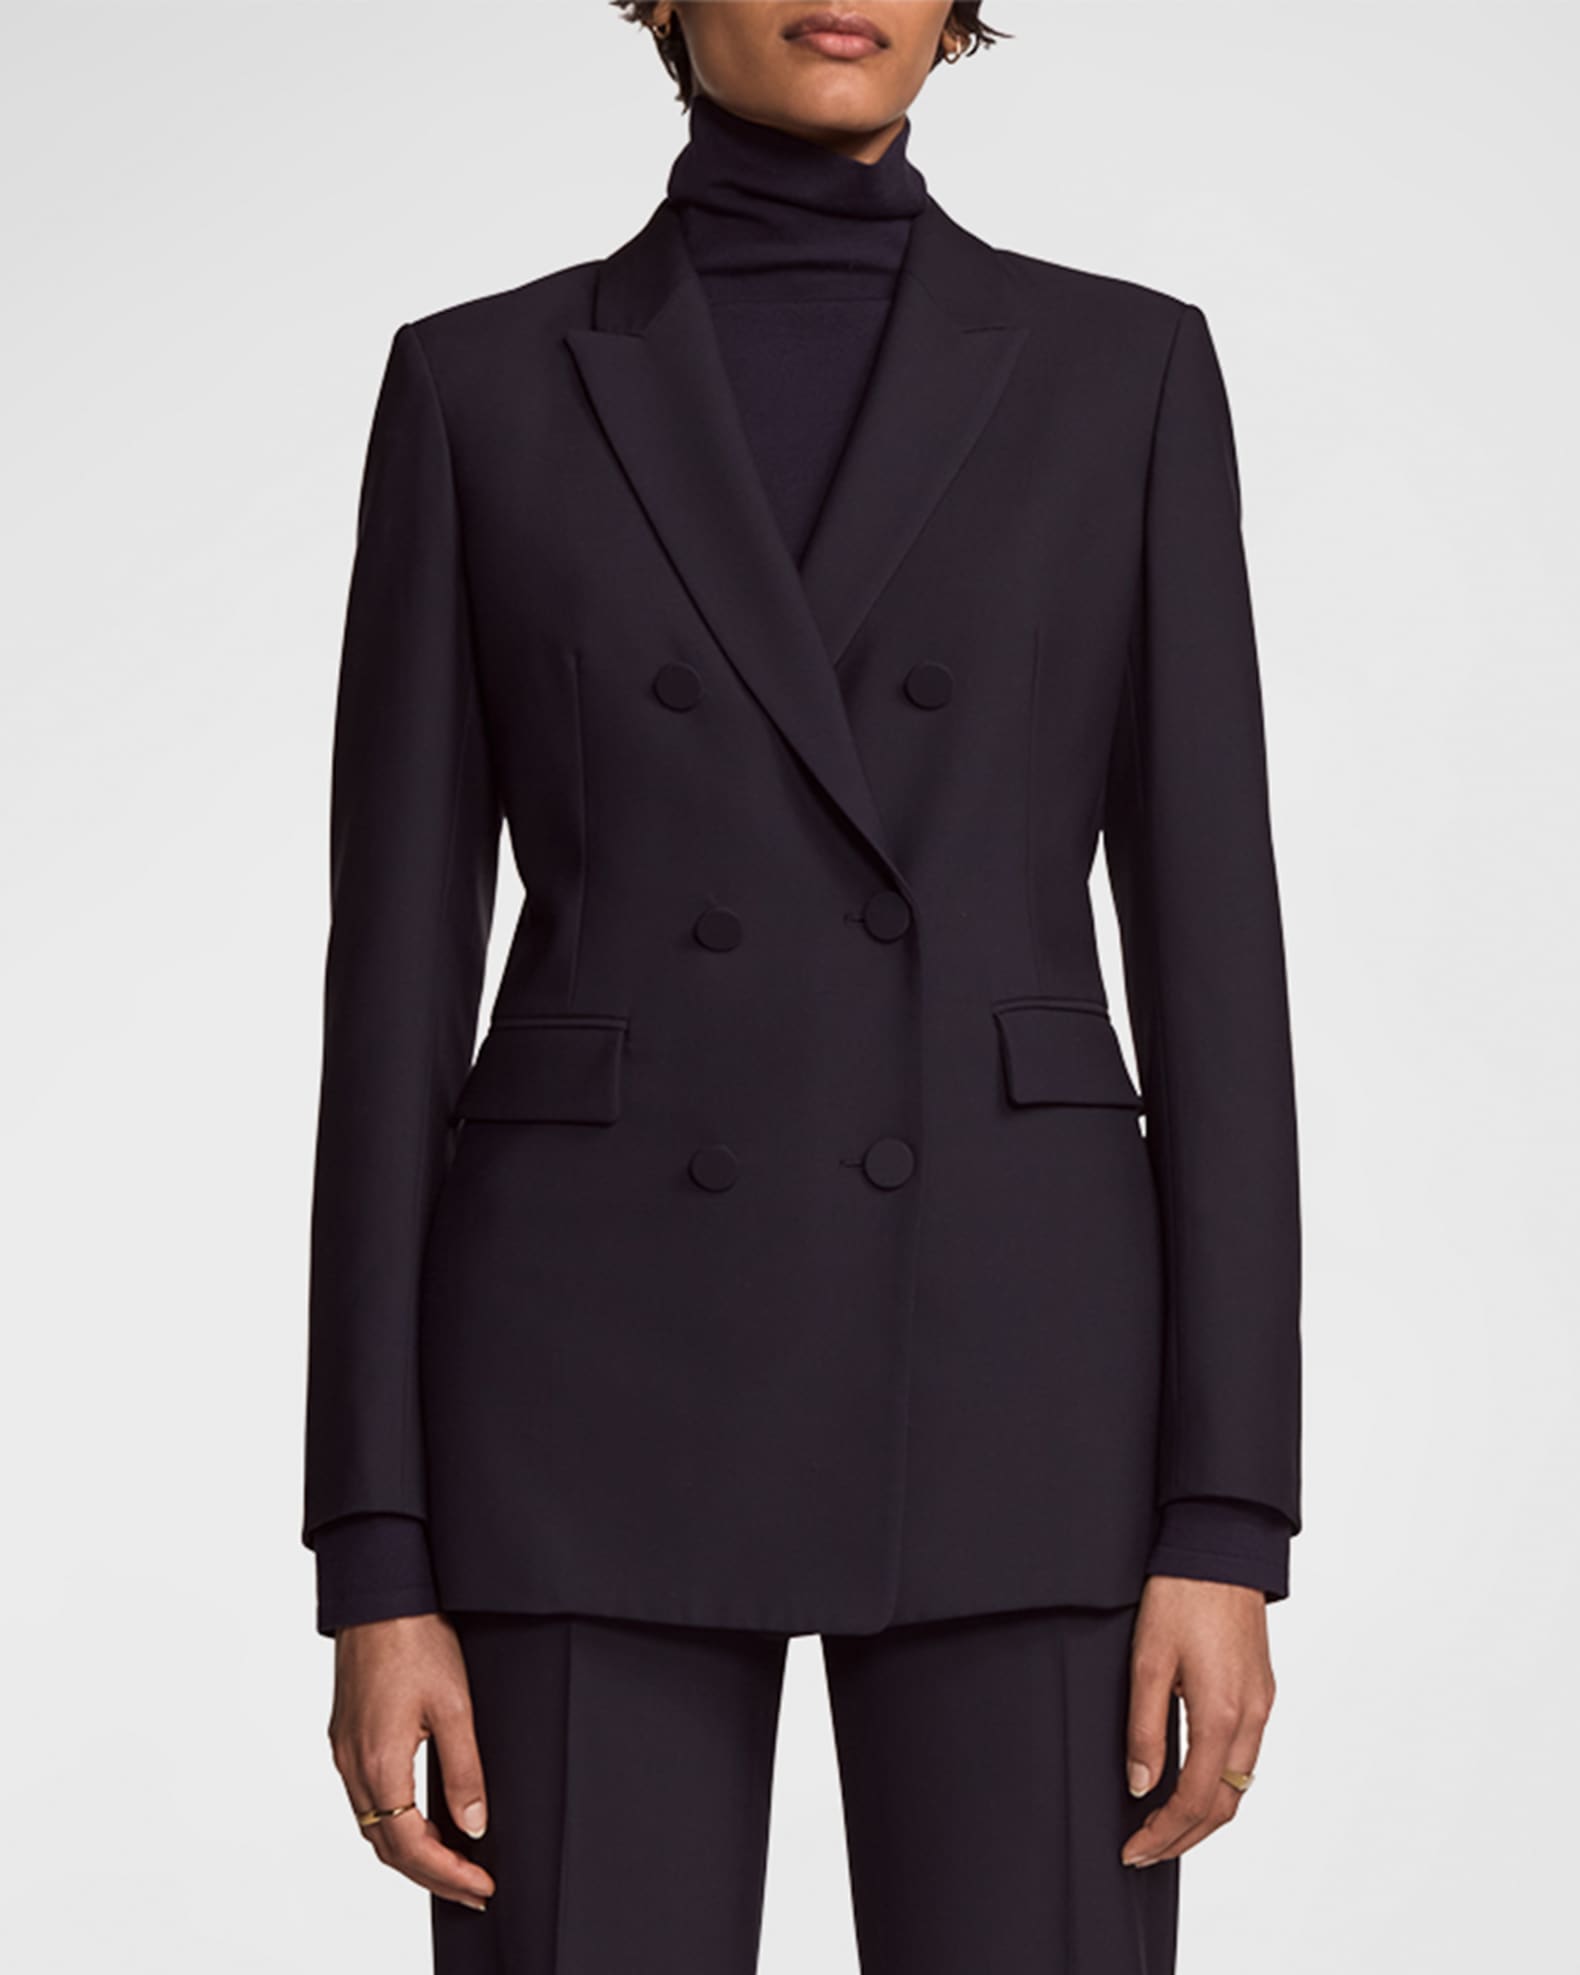 Another Tomorrow Wool Double-Breasted Blazer Jacket | Neiman Marcus